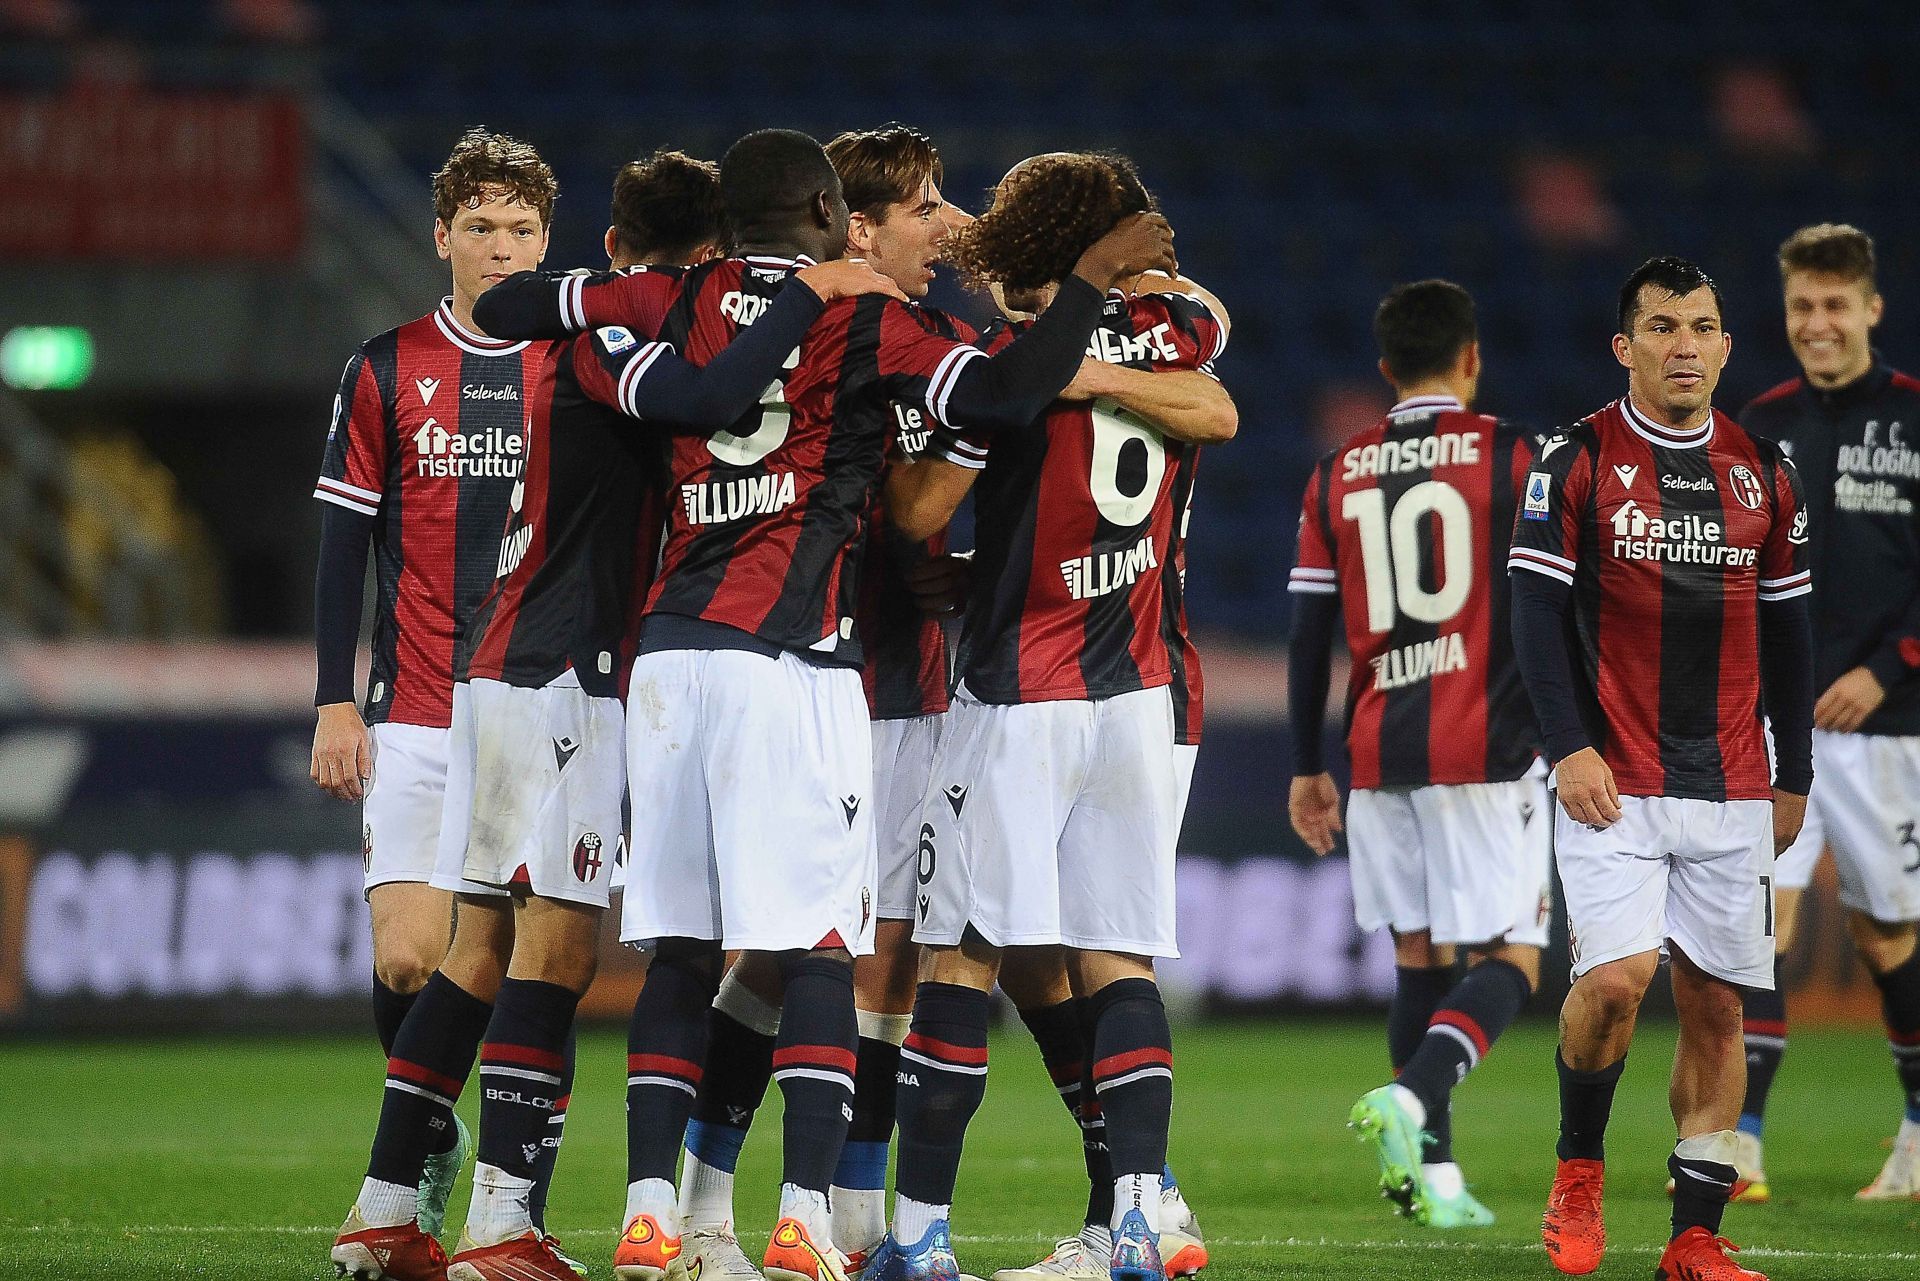 Bologna will be looking to bounce back